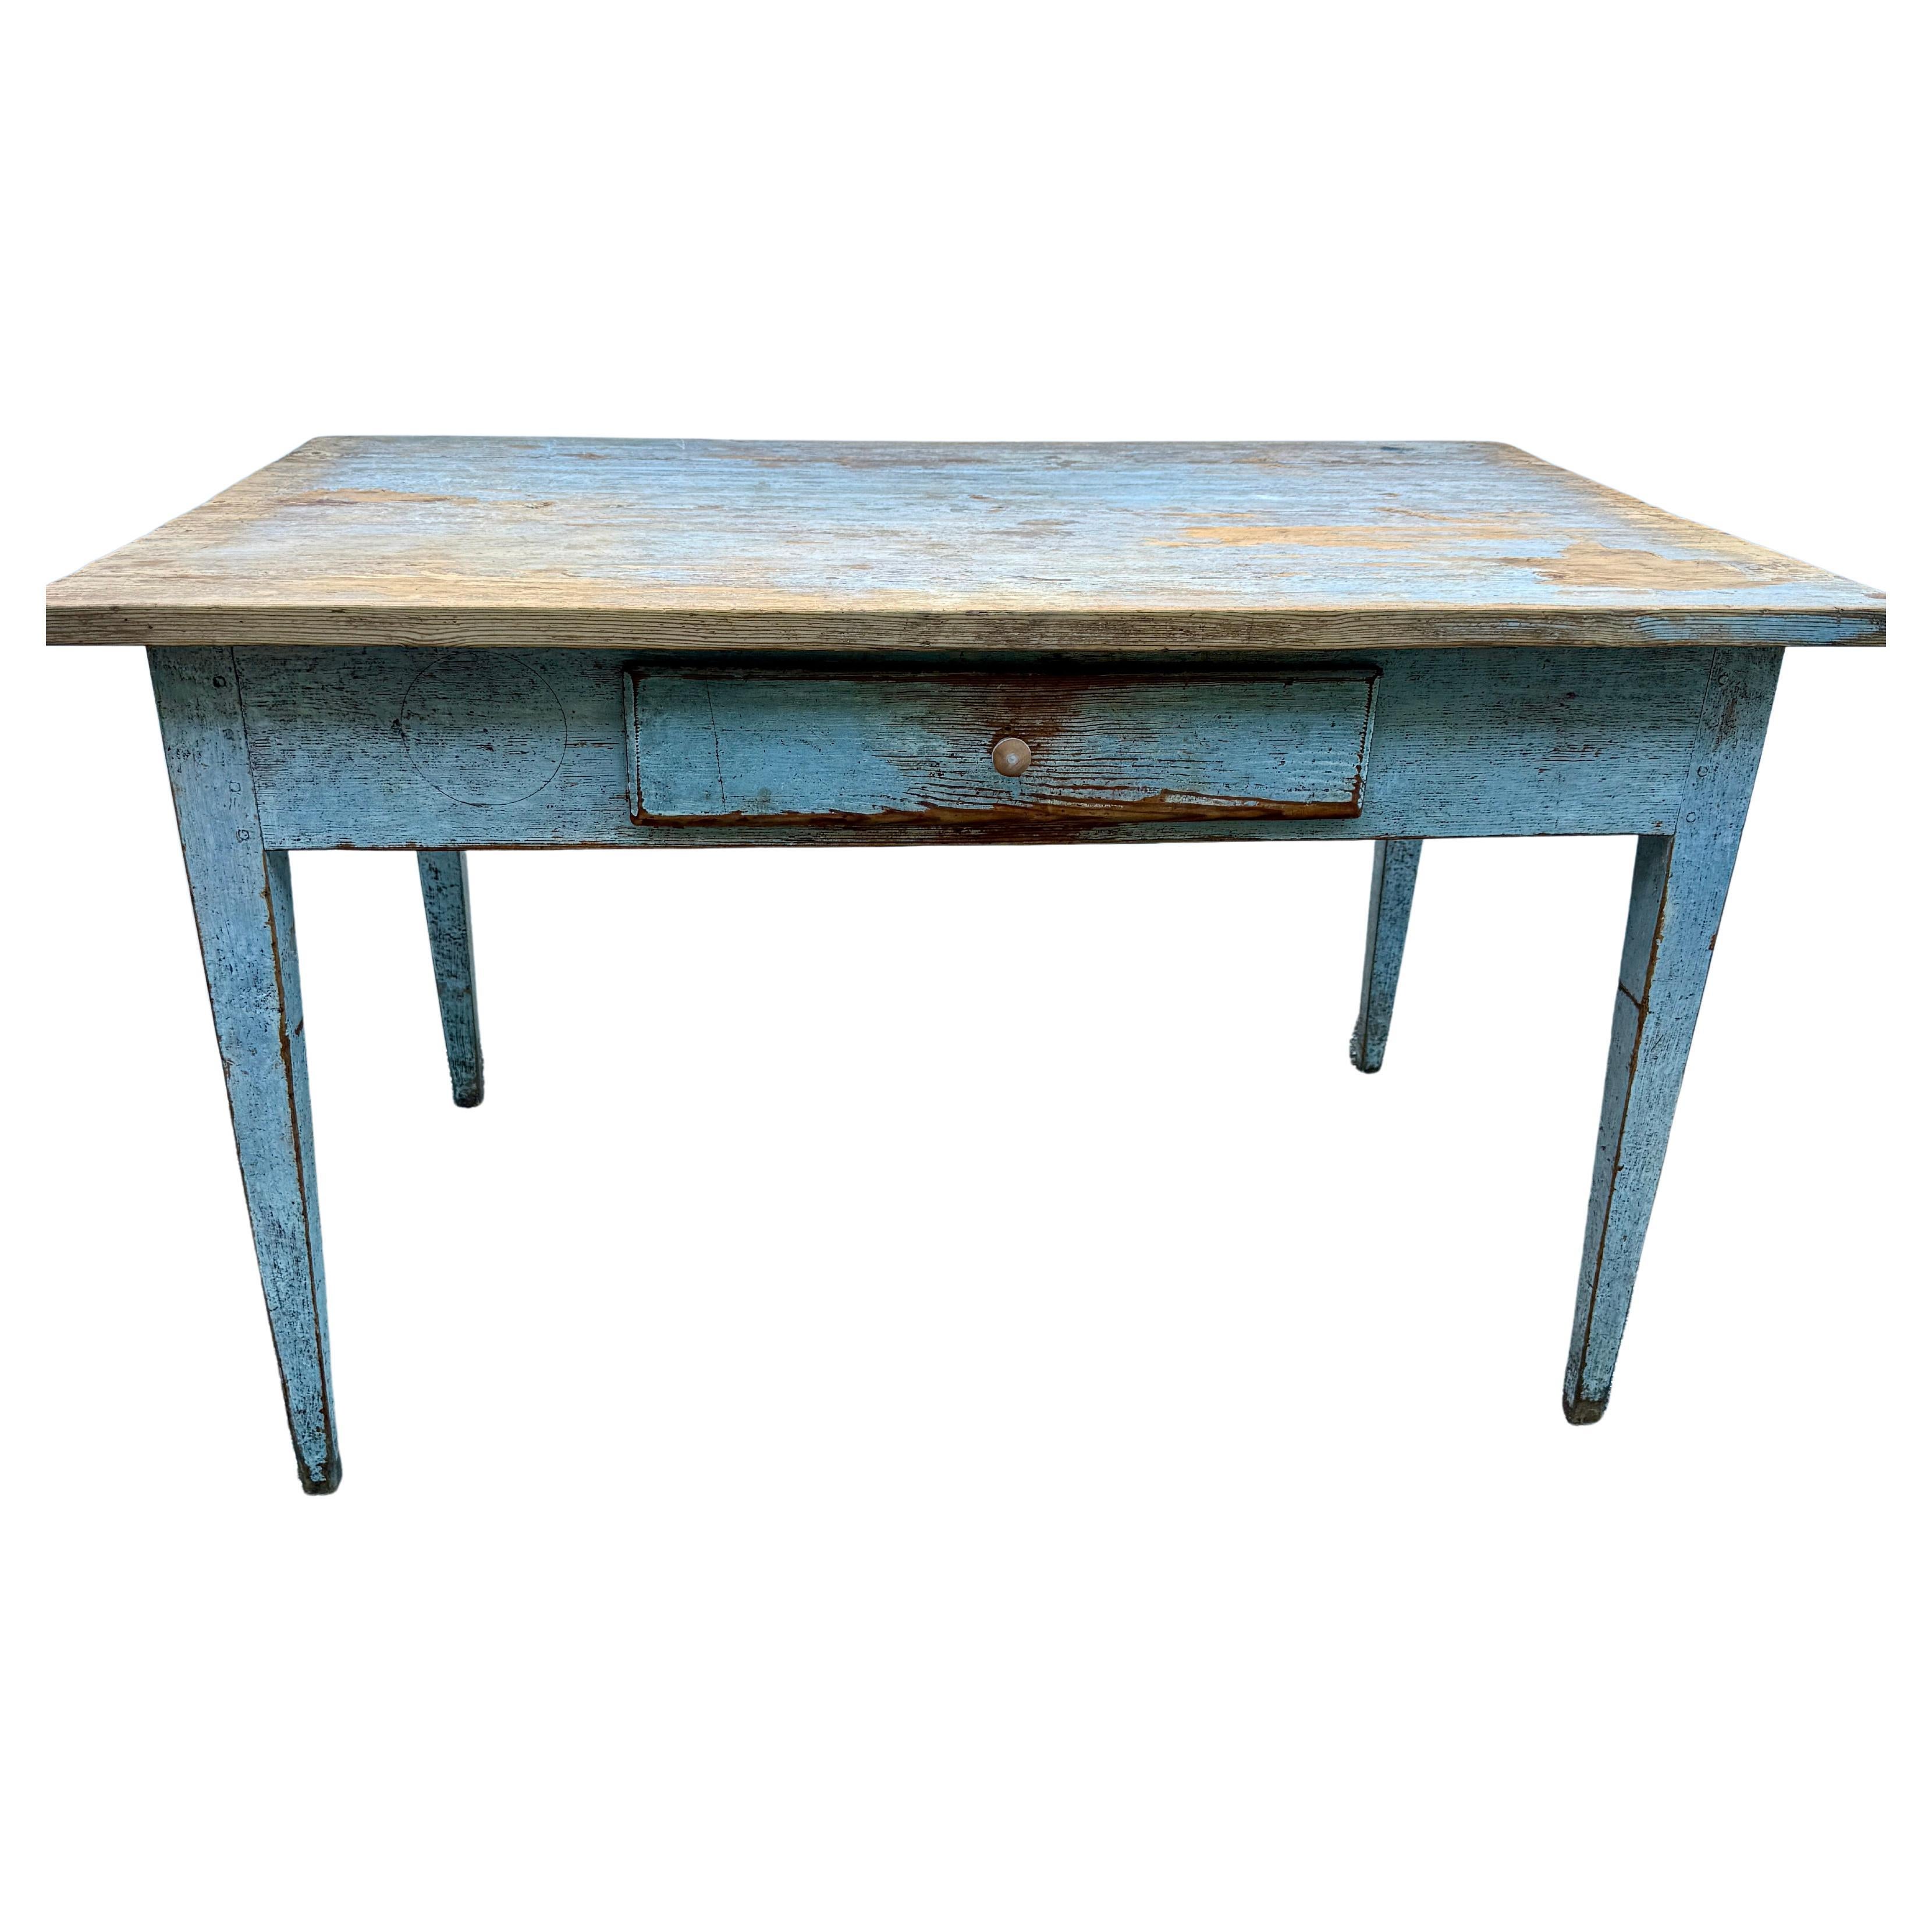 Period Swedish Gustavian Painted Office Desk Table With Drawer, 1790-1810